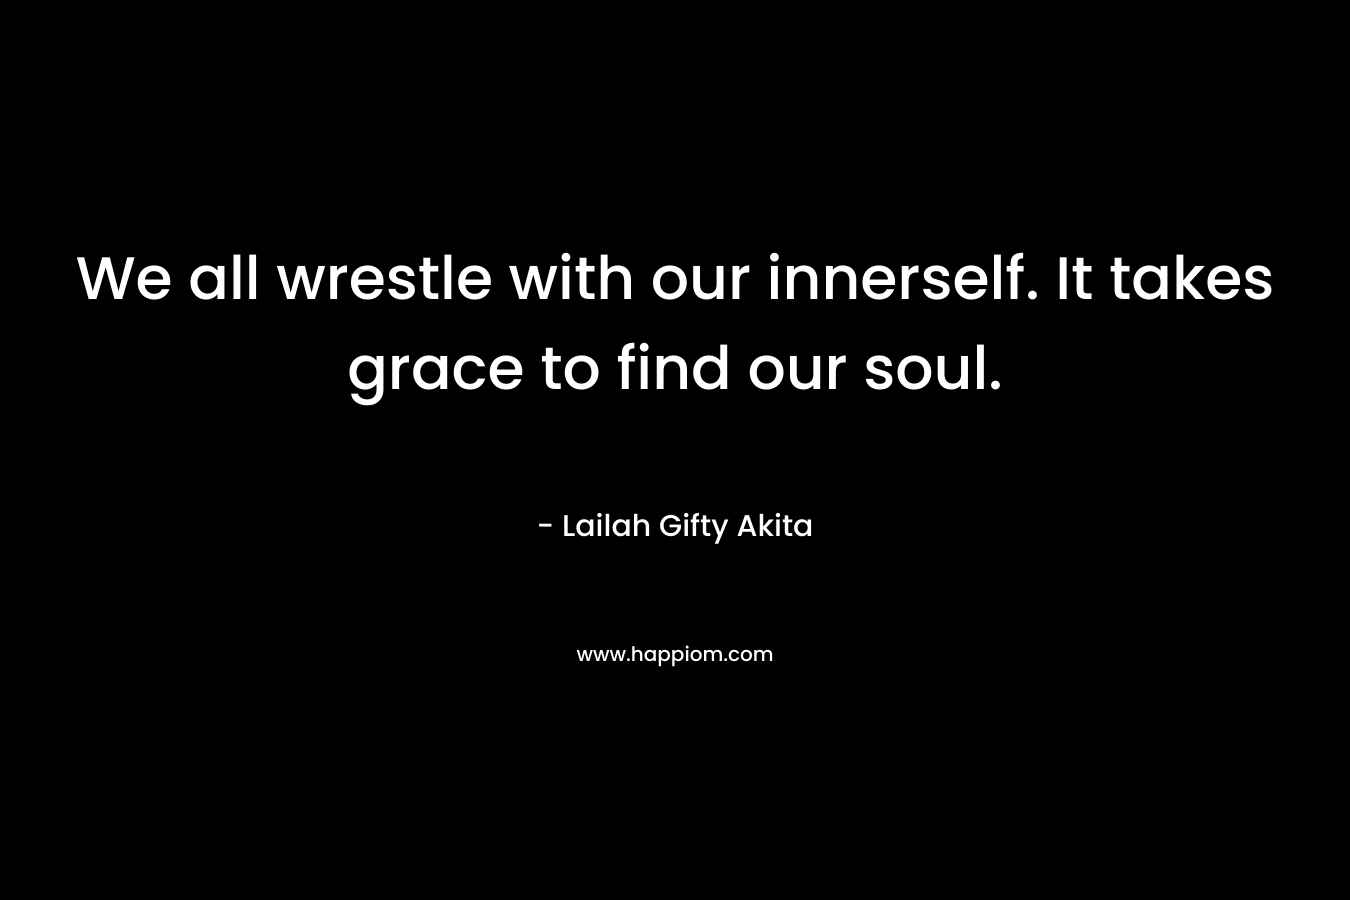 We all wrestle with our innerself. It takes grace to find our soul. – Lailah Gifty Akita